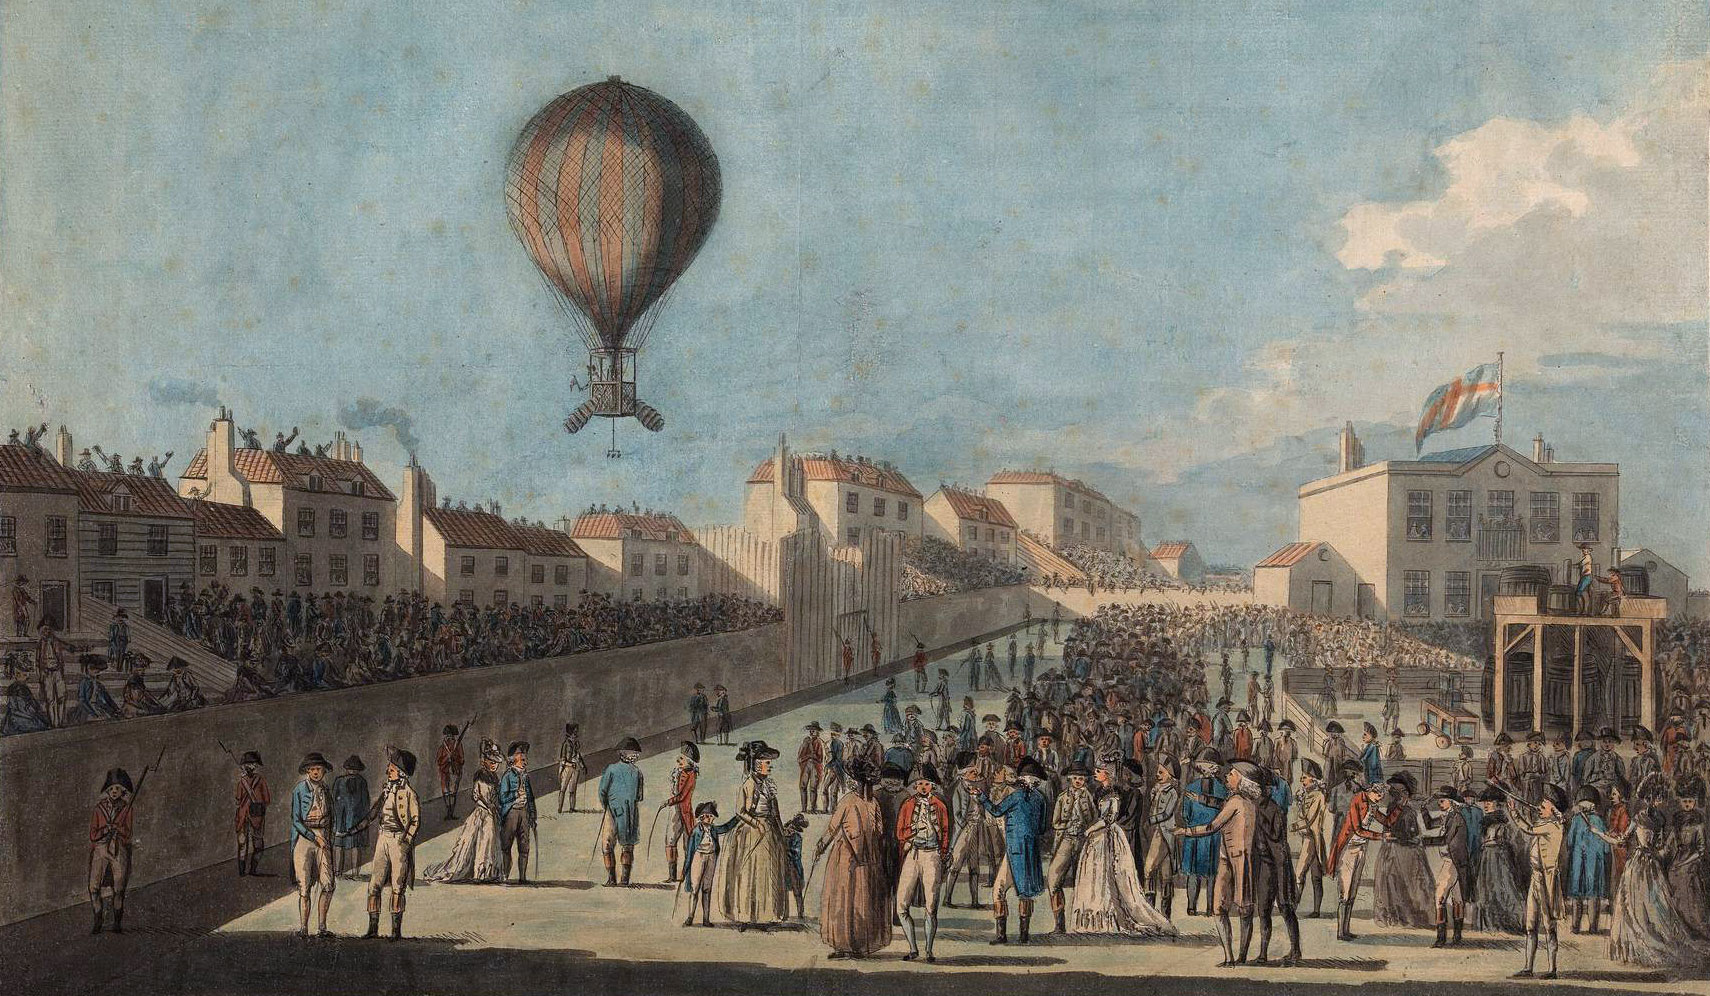 Francis Jukes makes the first balloon ascent in England in 1784. 